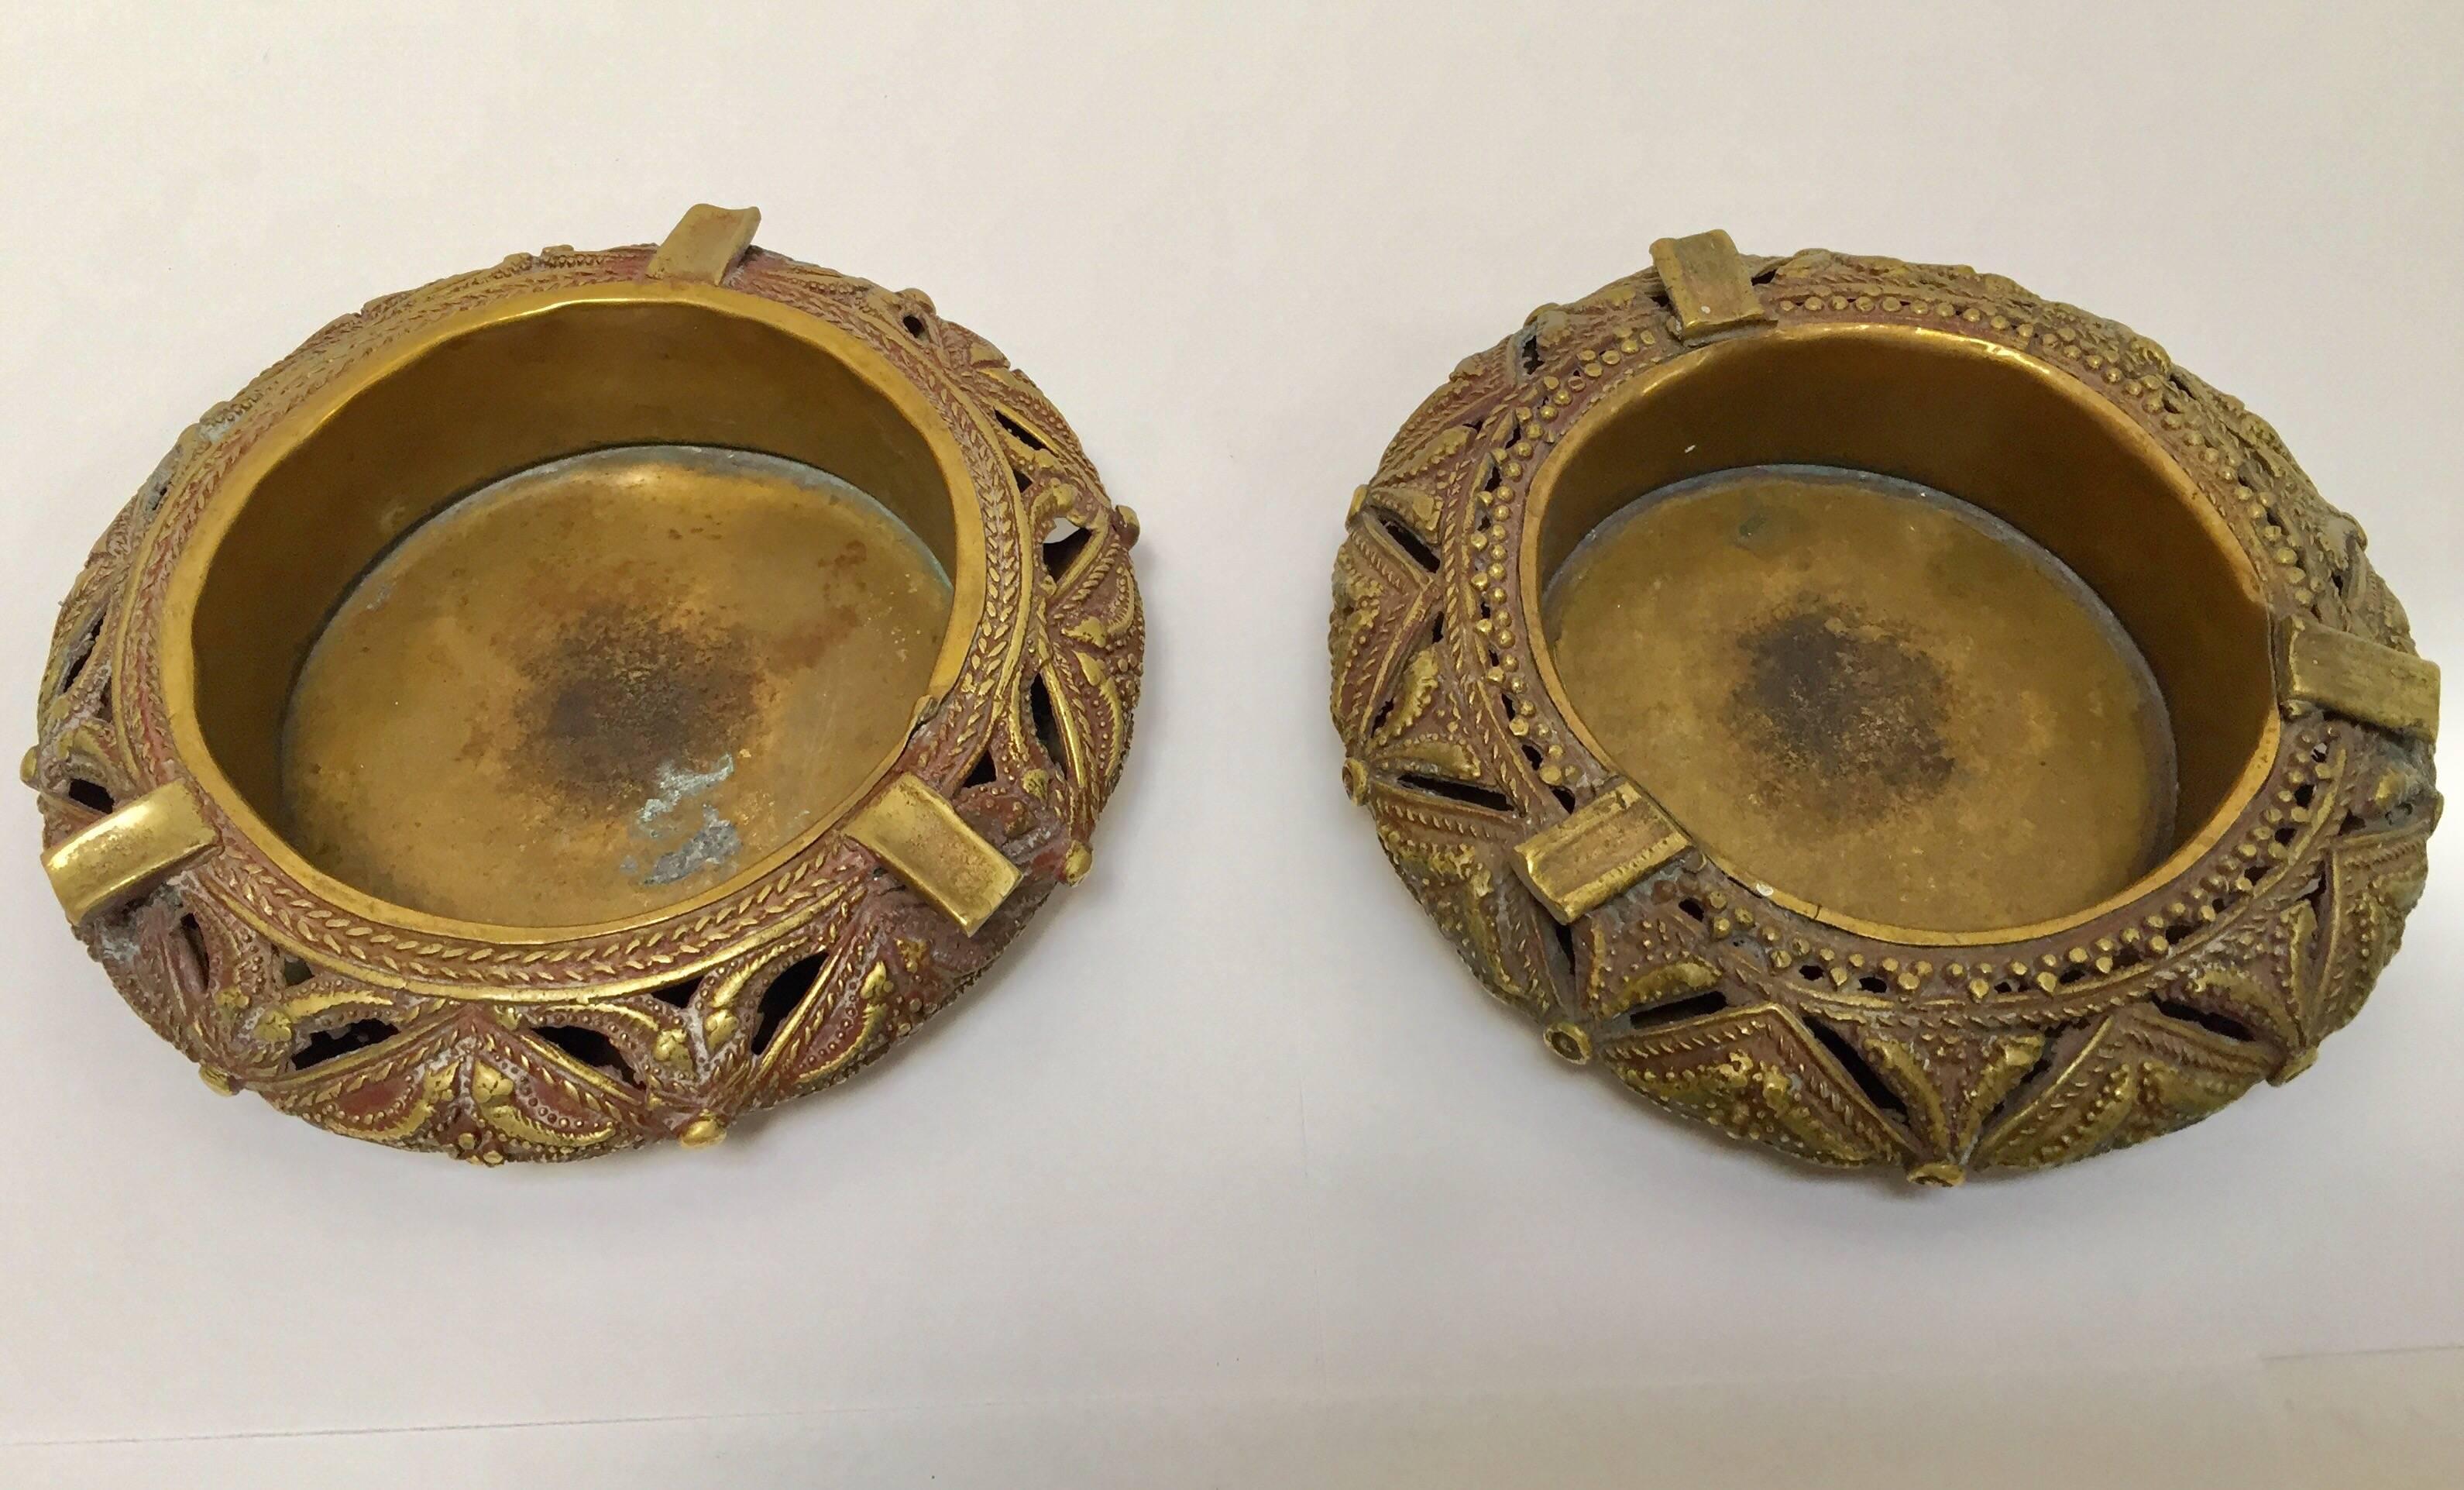 Pair of round handcrafted cast brass ashtrays.
Large Anglo Raj brass ashtrays, nice filigree designs and a lot of details.
Measures: 5.5